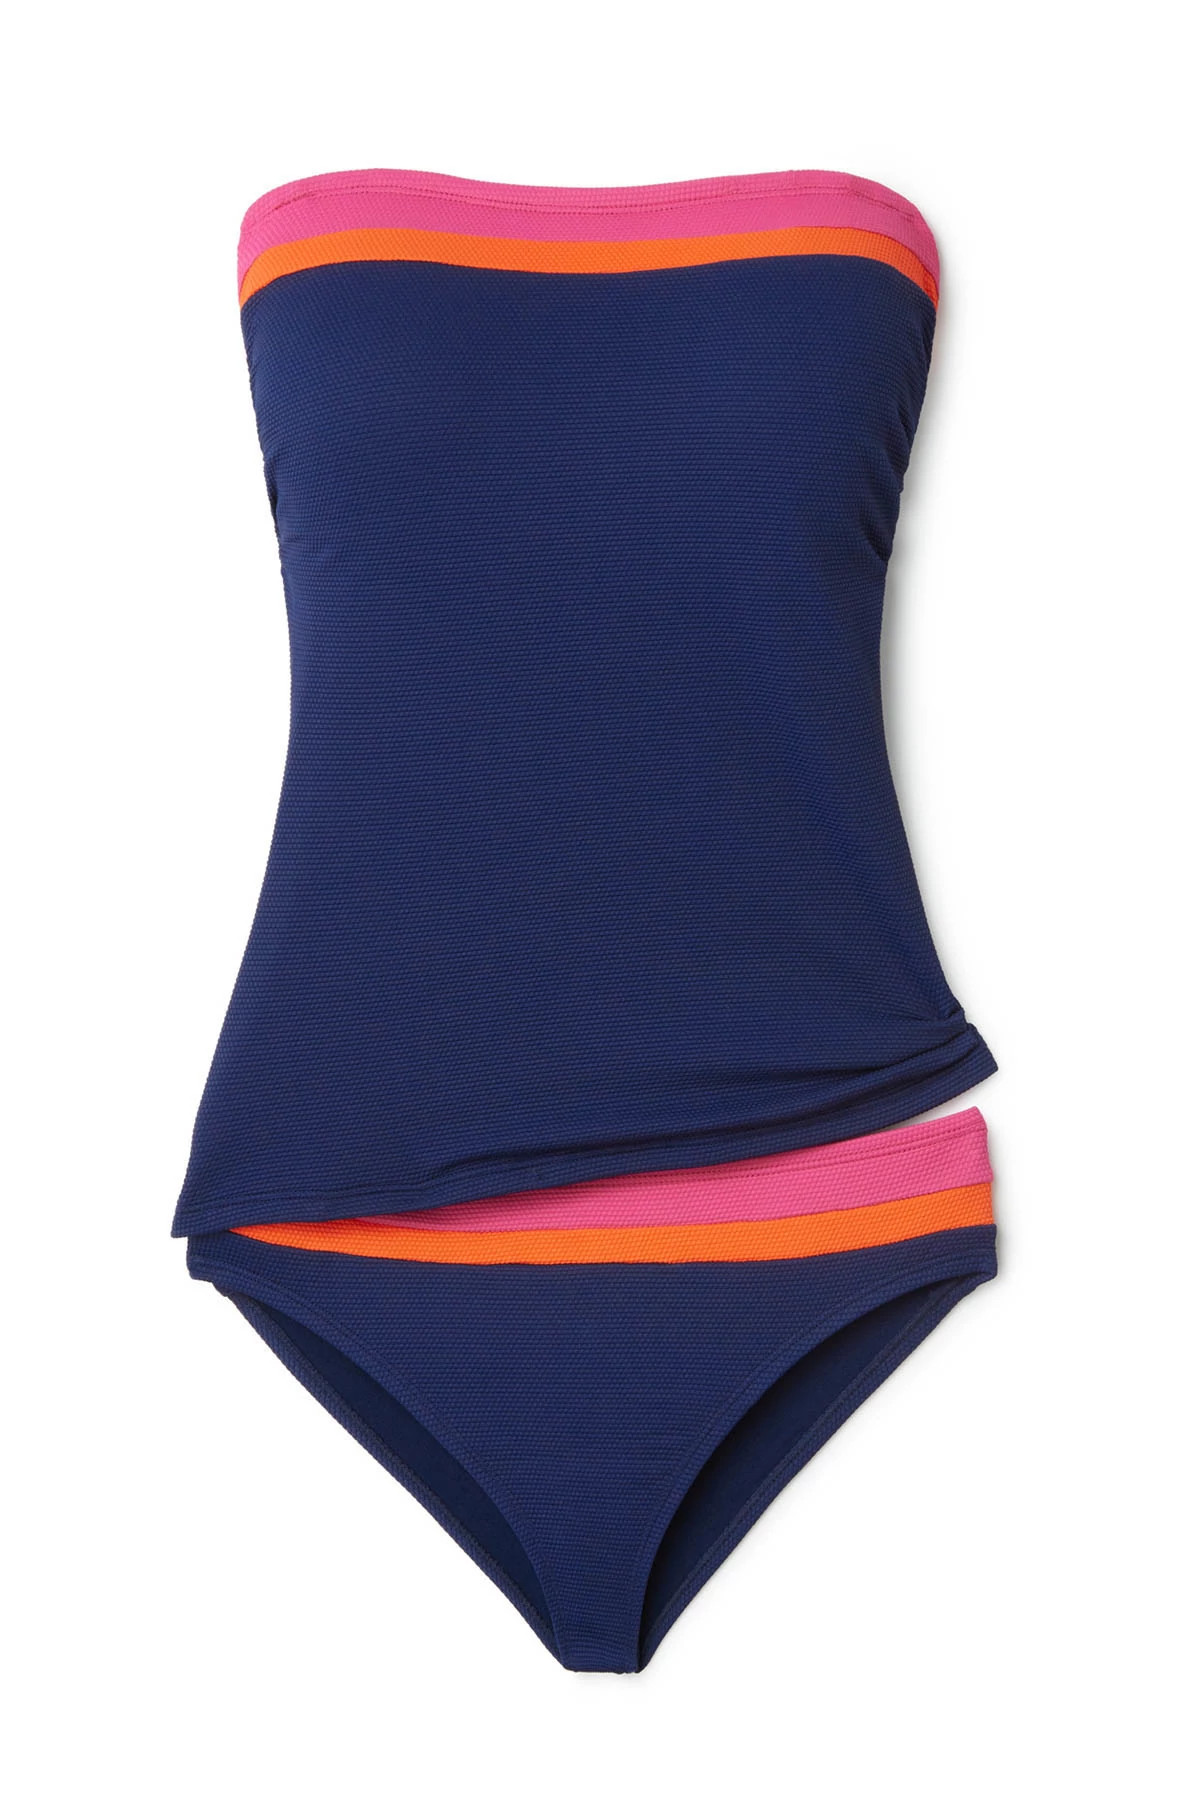 PASSION PINK Colorblock Bandini Molded Bandeau Tankini Top image number 3